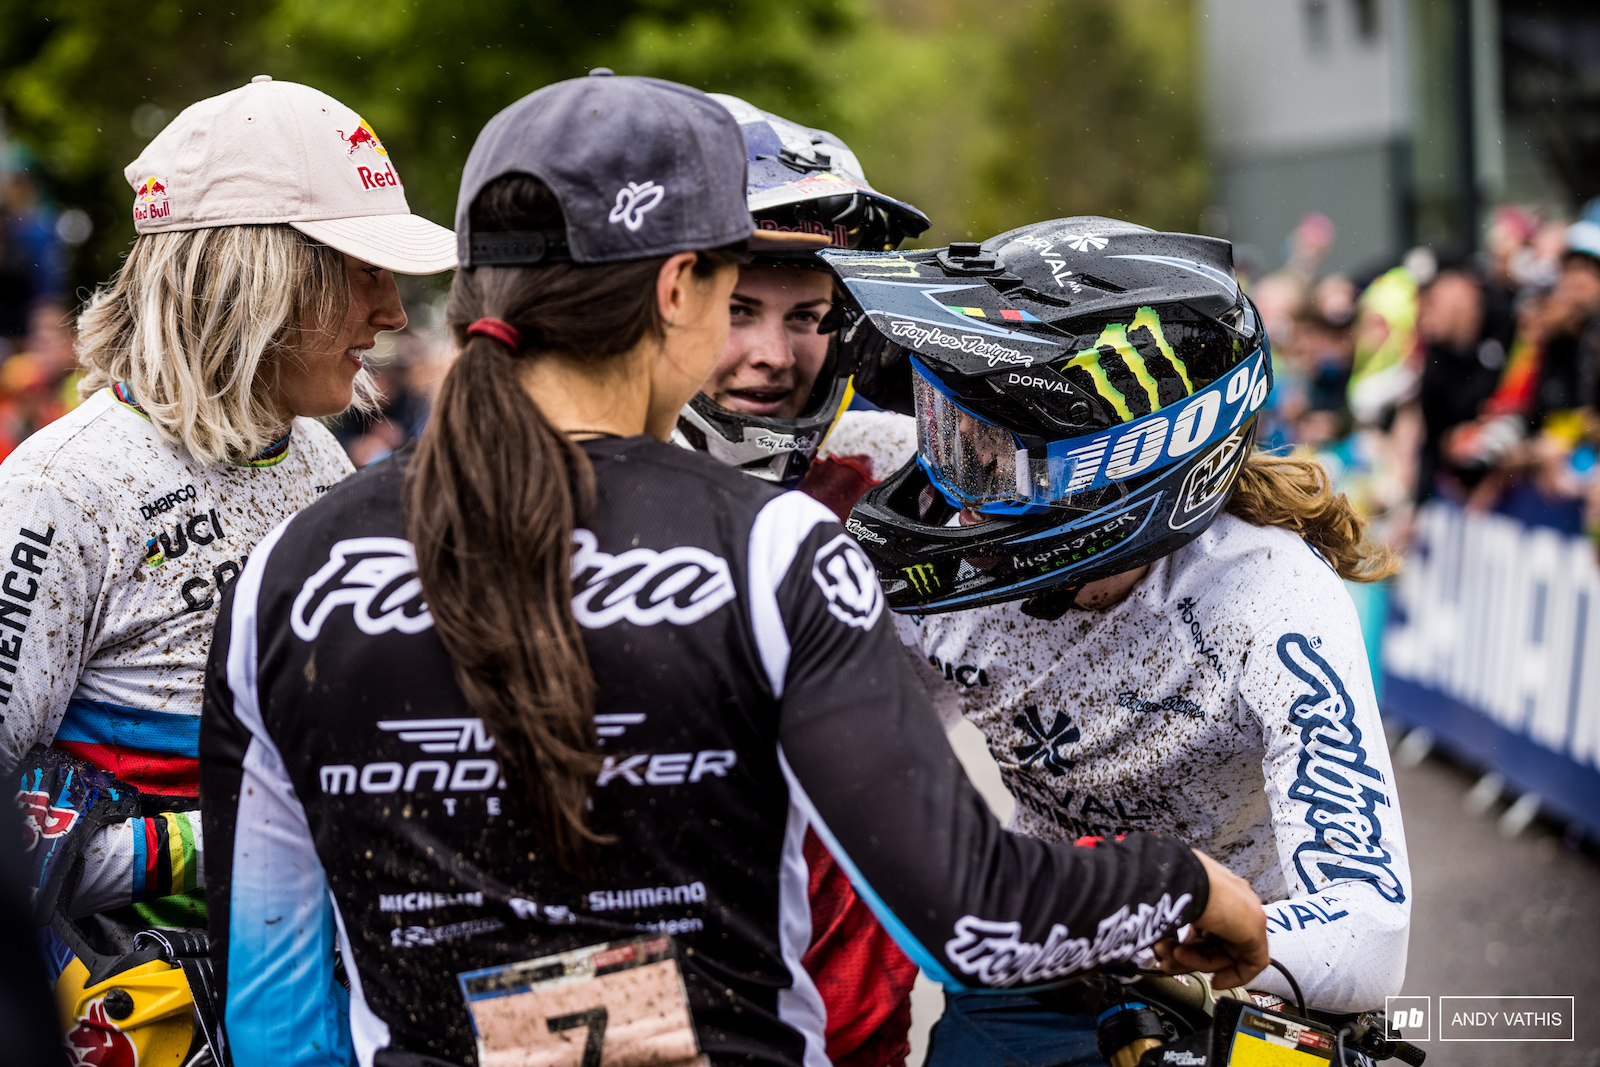 Sportsmanship always prevails at the end of the day. The women take turns checking in on Balanche.